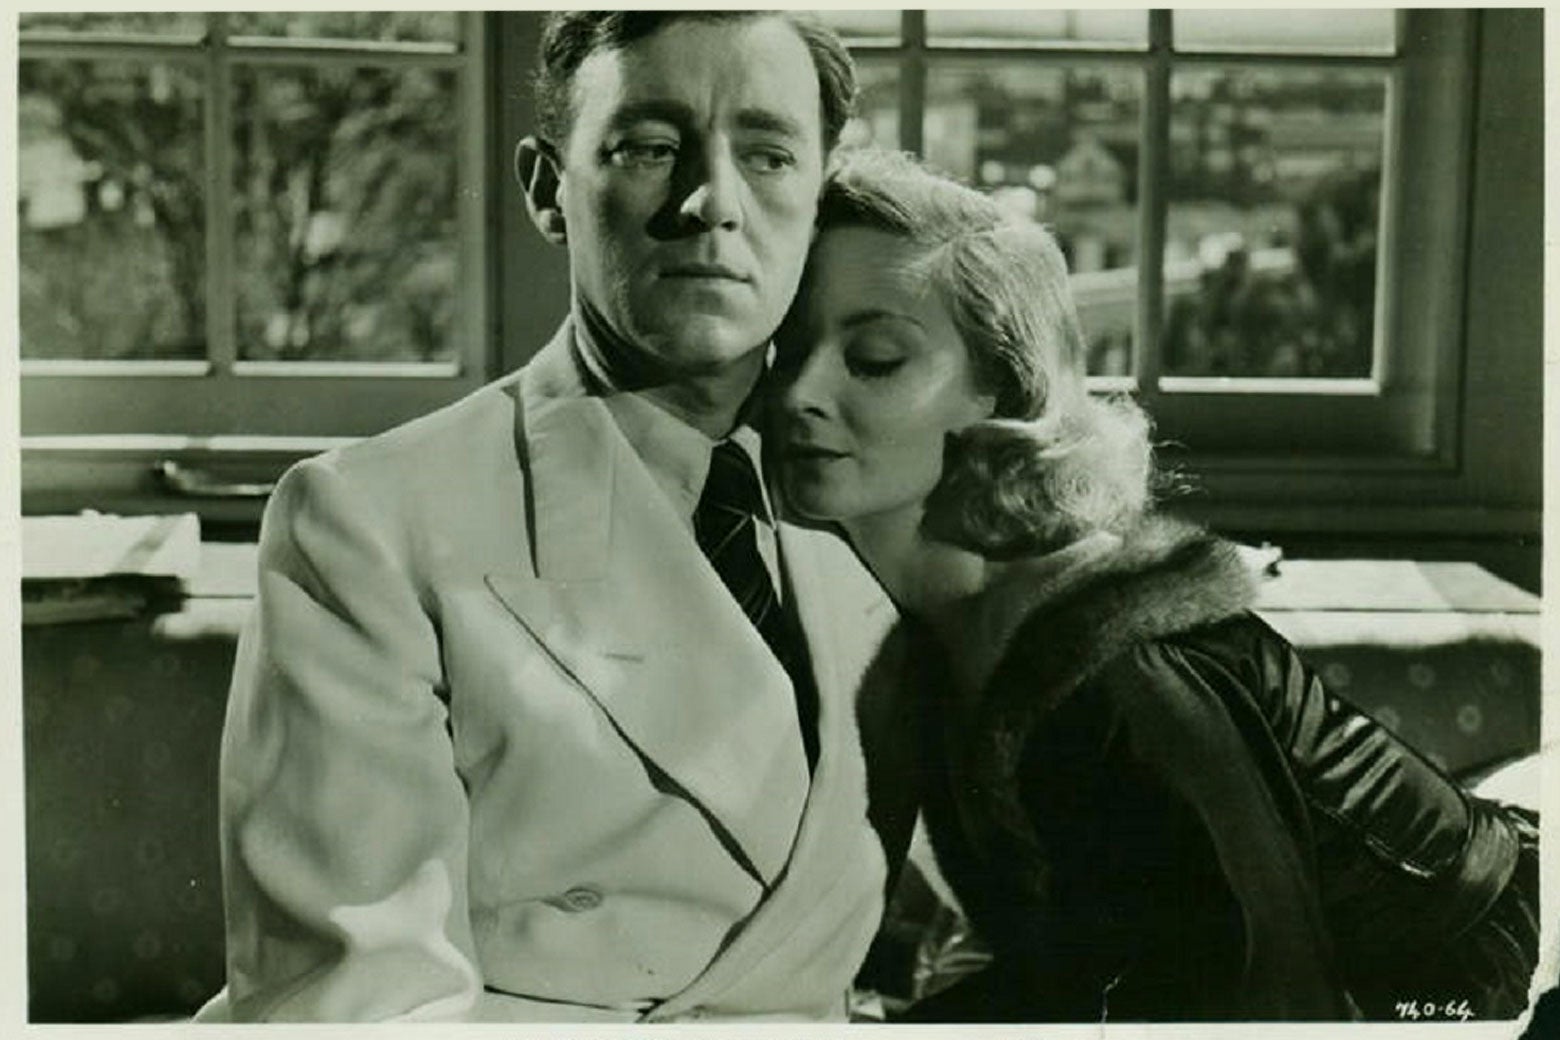 A still image of Alec Guinness and a woman in The Man in the White Suit.